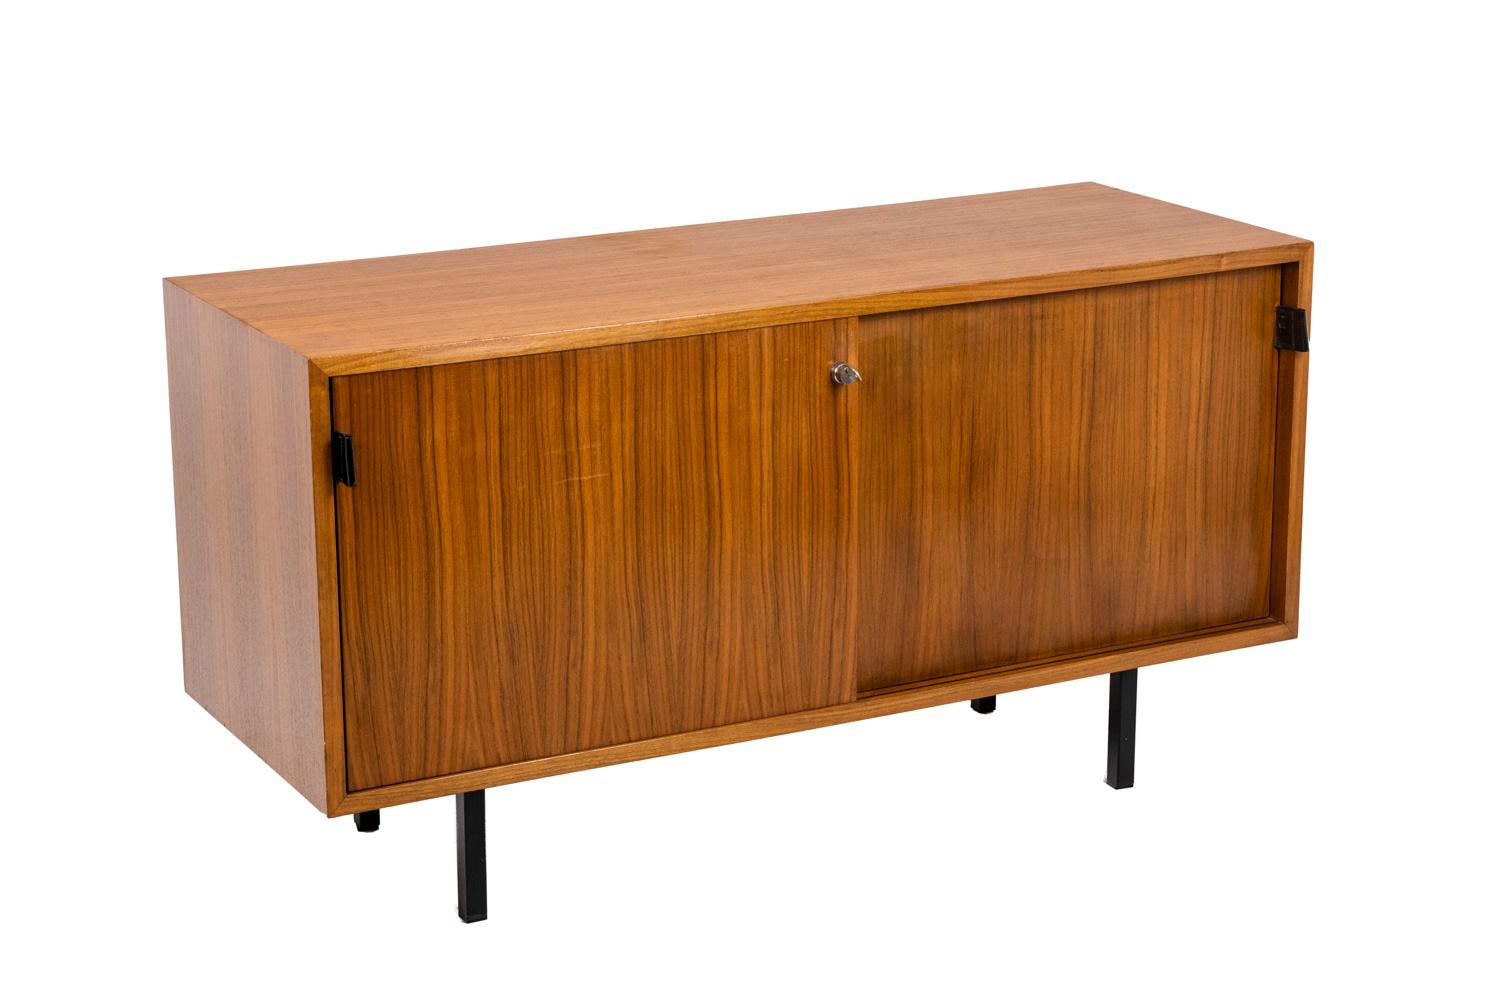 Florence Knoll, attributed to. 
Sideboard in teak opening with two sliding doors, standing on a four-legged square-section base in black tinted metal. Black leather handles. Two interior shelves. Original key.

American work realized in the